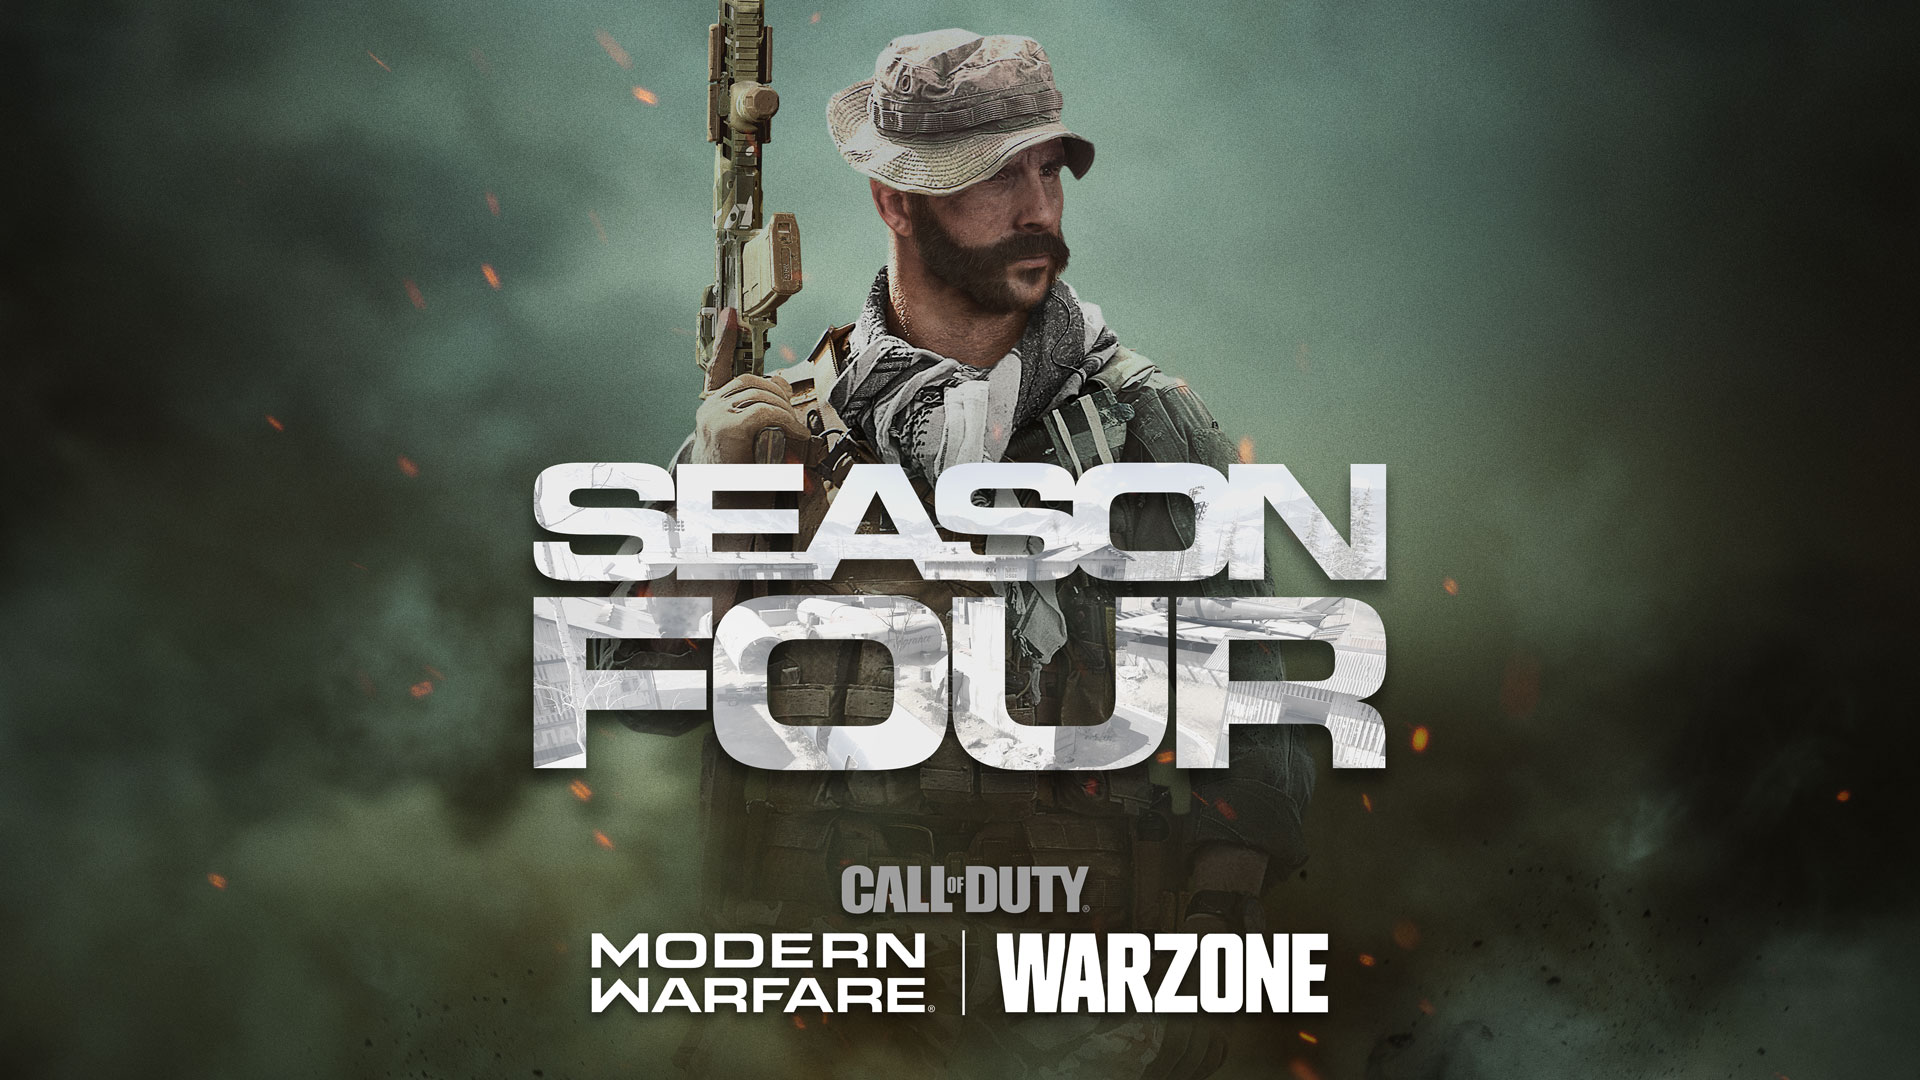 Captain Price Leads The Charge In A Packed New Season Of Call